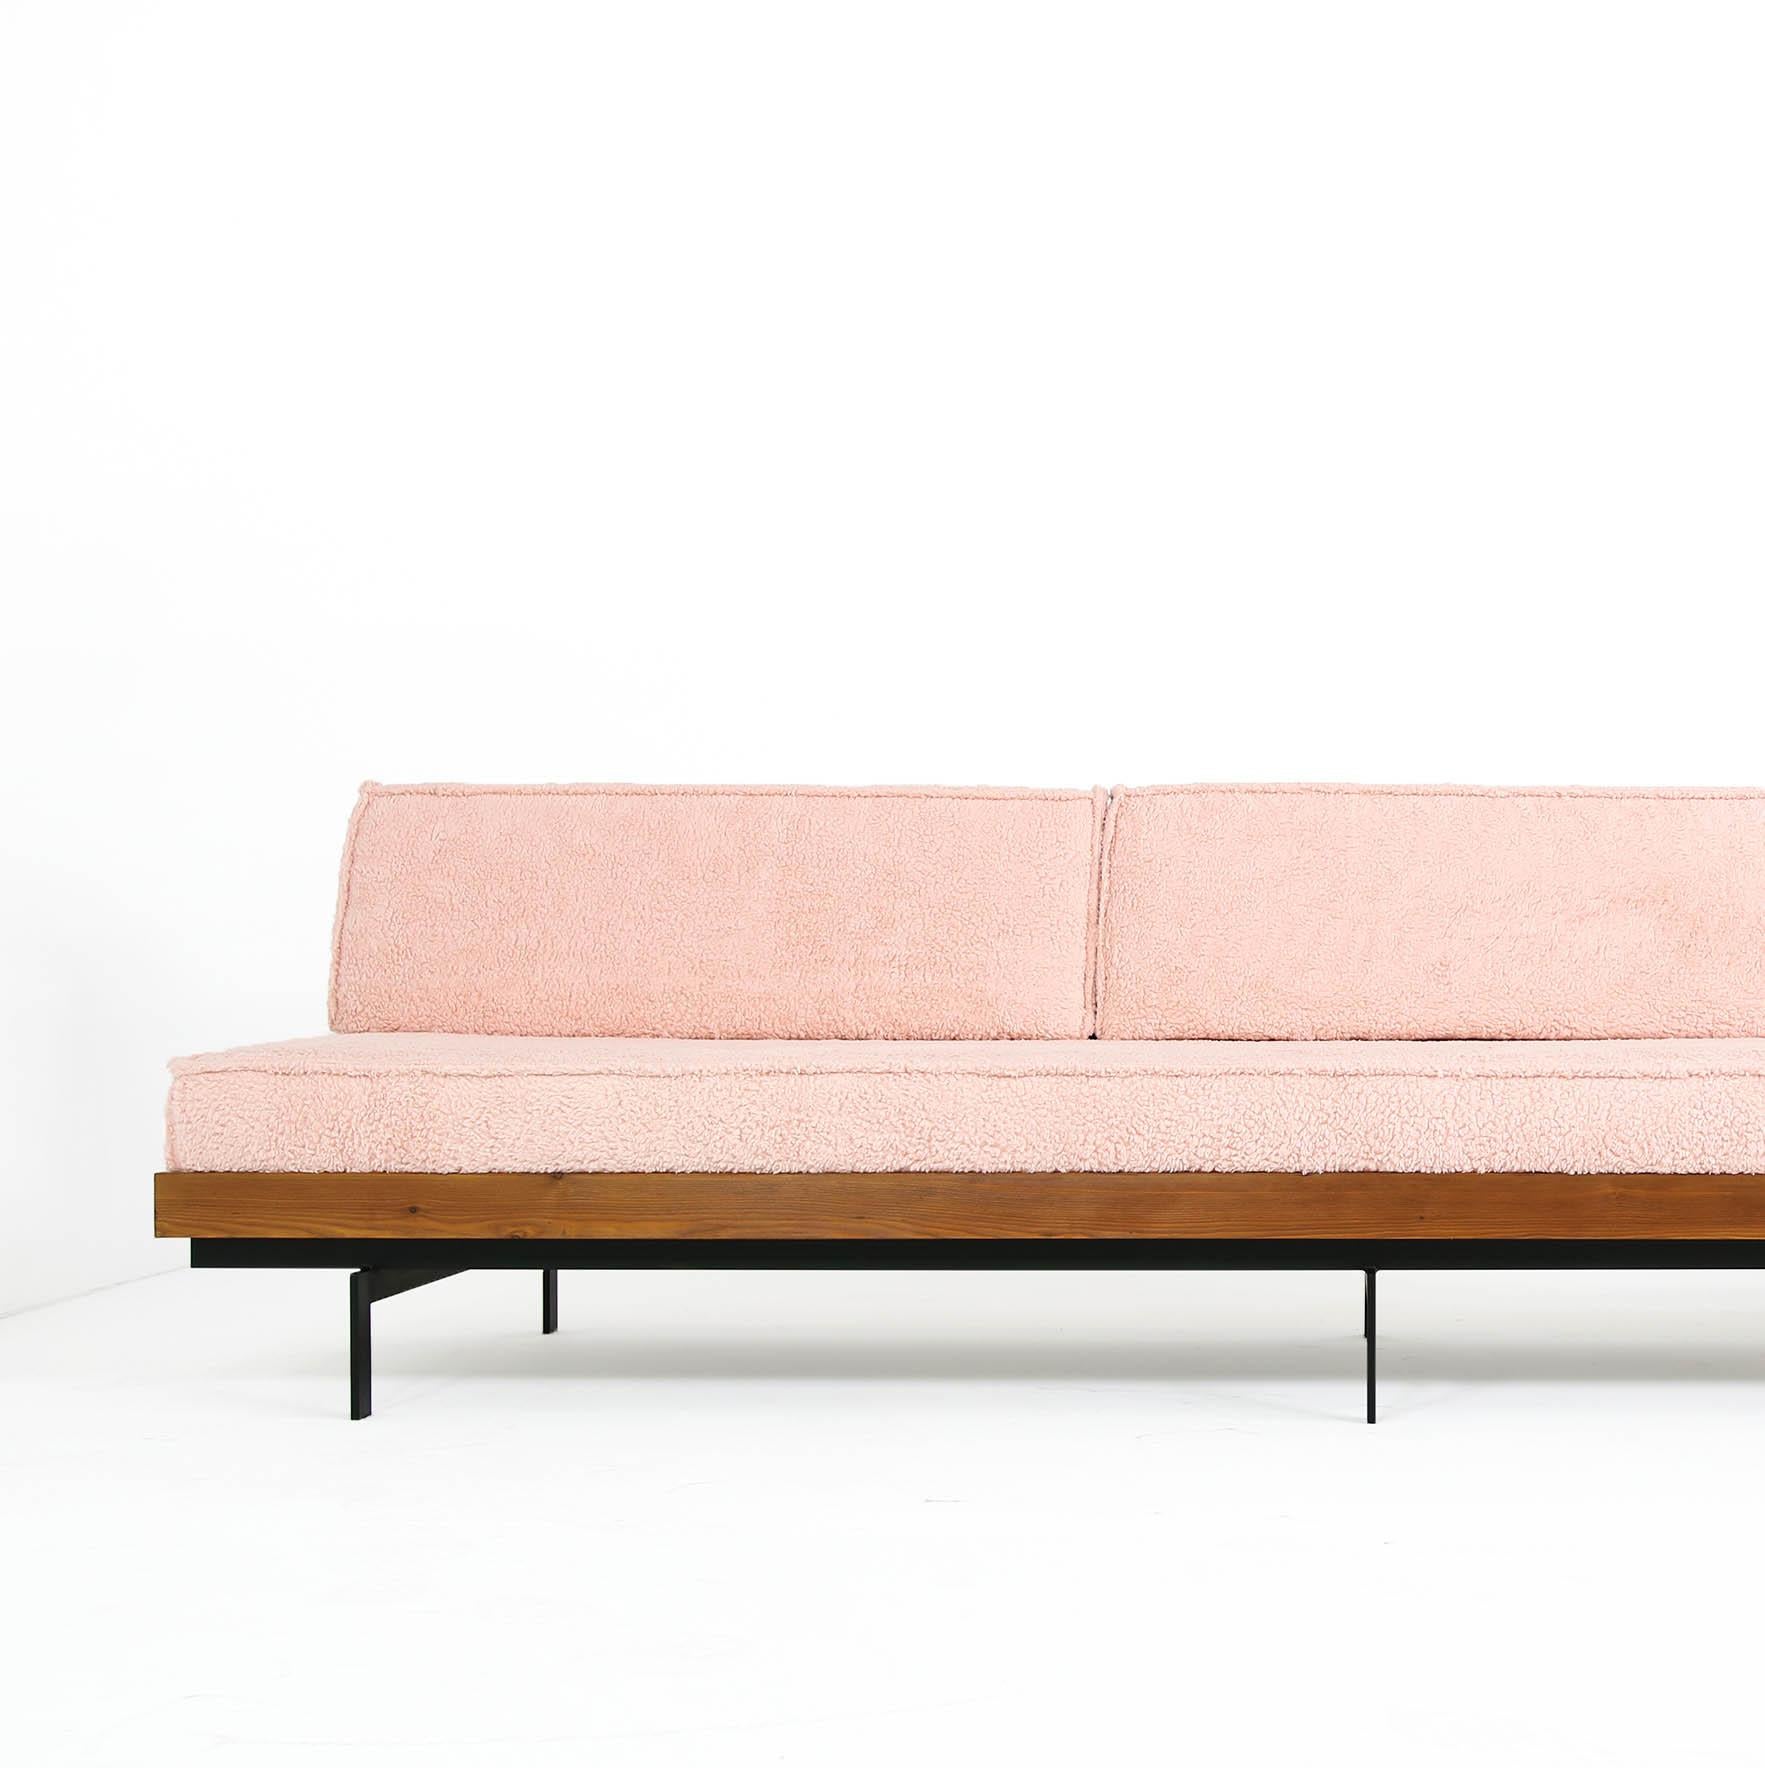 Beautiful Nathan Lindberg Siberian larch wood (larix sibirica) super long daybed, teak vintage stained, all done in solid wood, steel base, minimalist design but heavy weight, high density foam mattress, covered with light pink eco fur, teddy bear